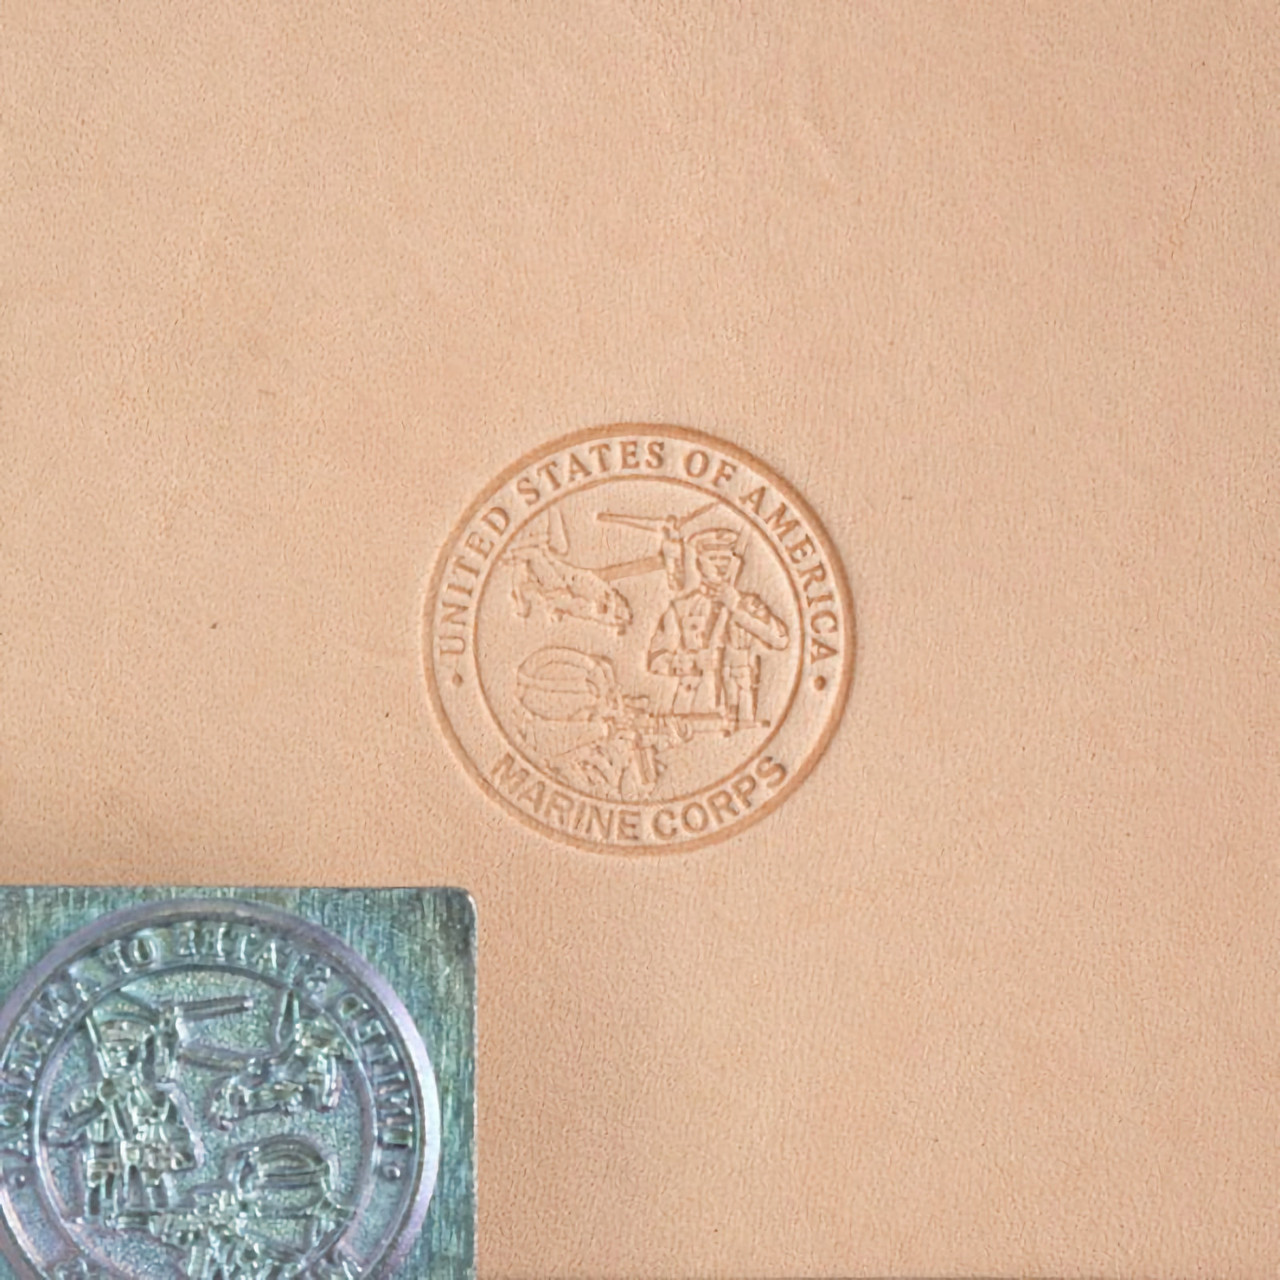 3D Marine Corps stamp with leather impression.